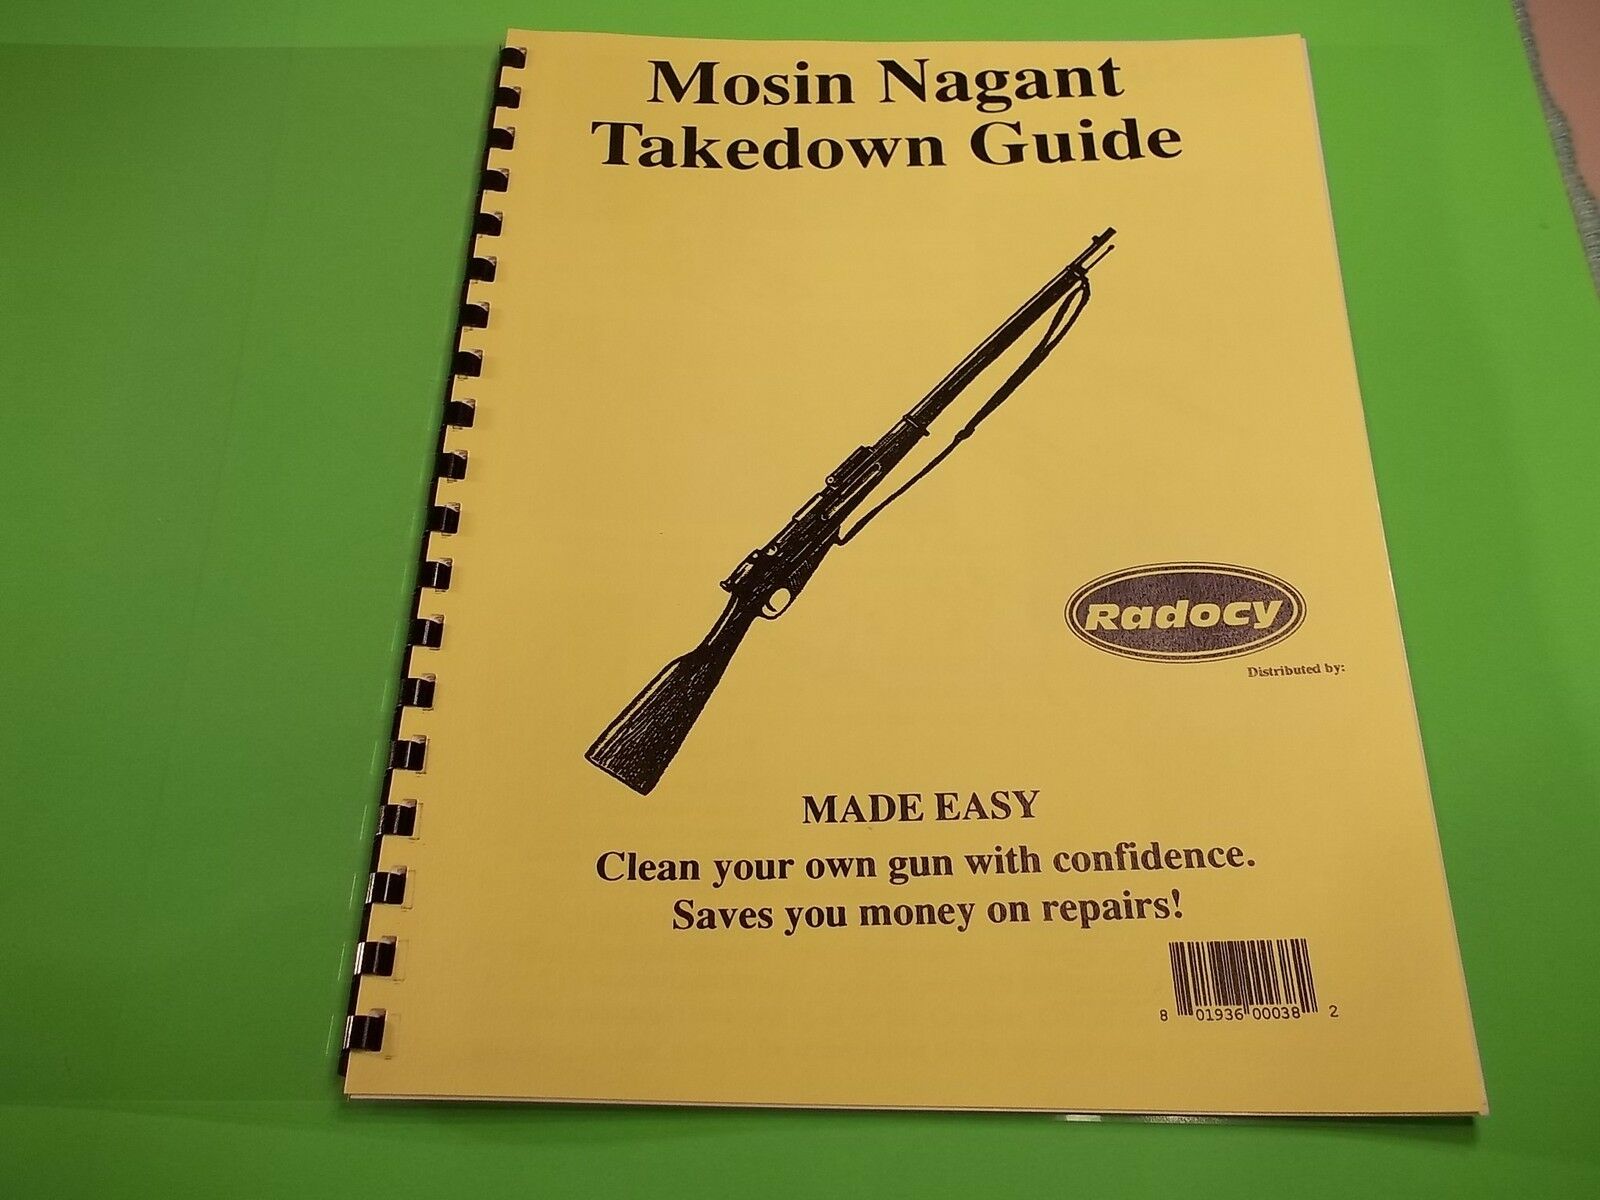 Takedown Manual Guide For Wwii Era Russian Mosin Nagant Bolt Rifle Good Material